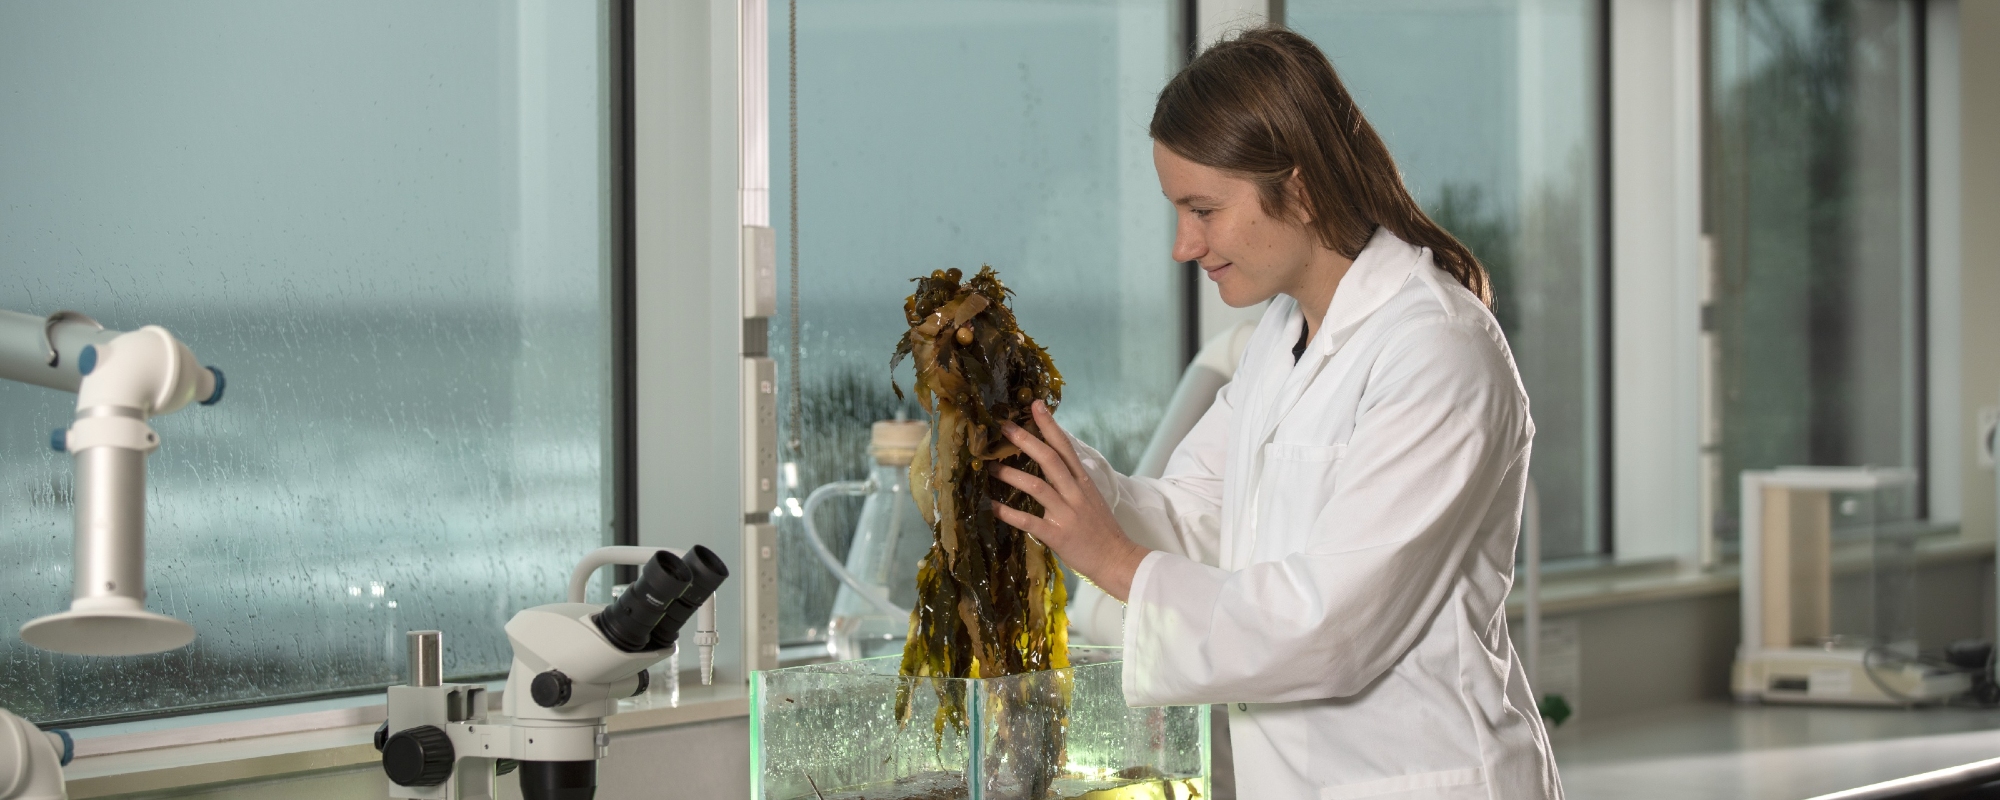 Master of Science student Lisa Wolf examines seaweed in a lab.